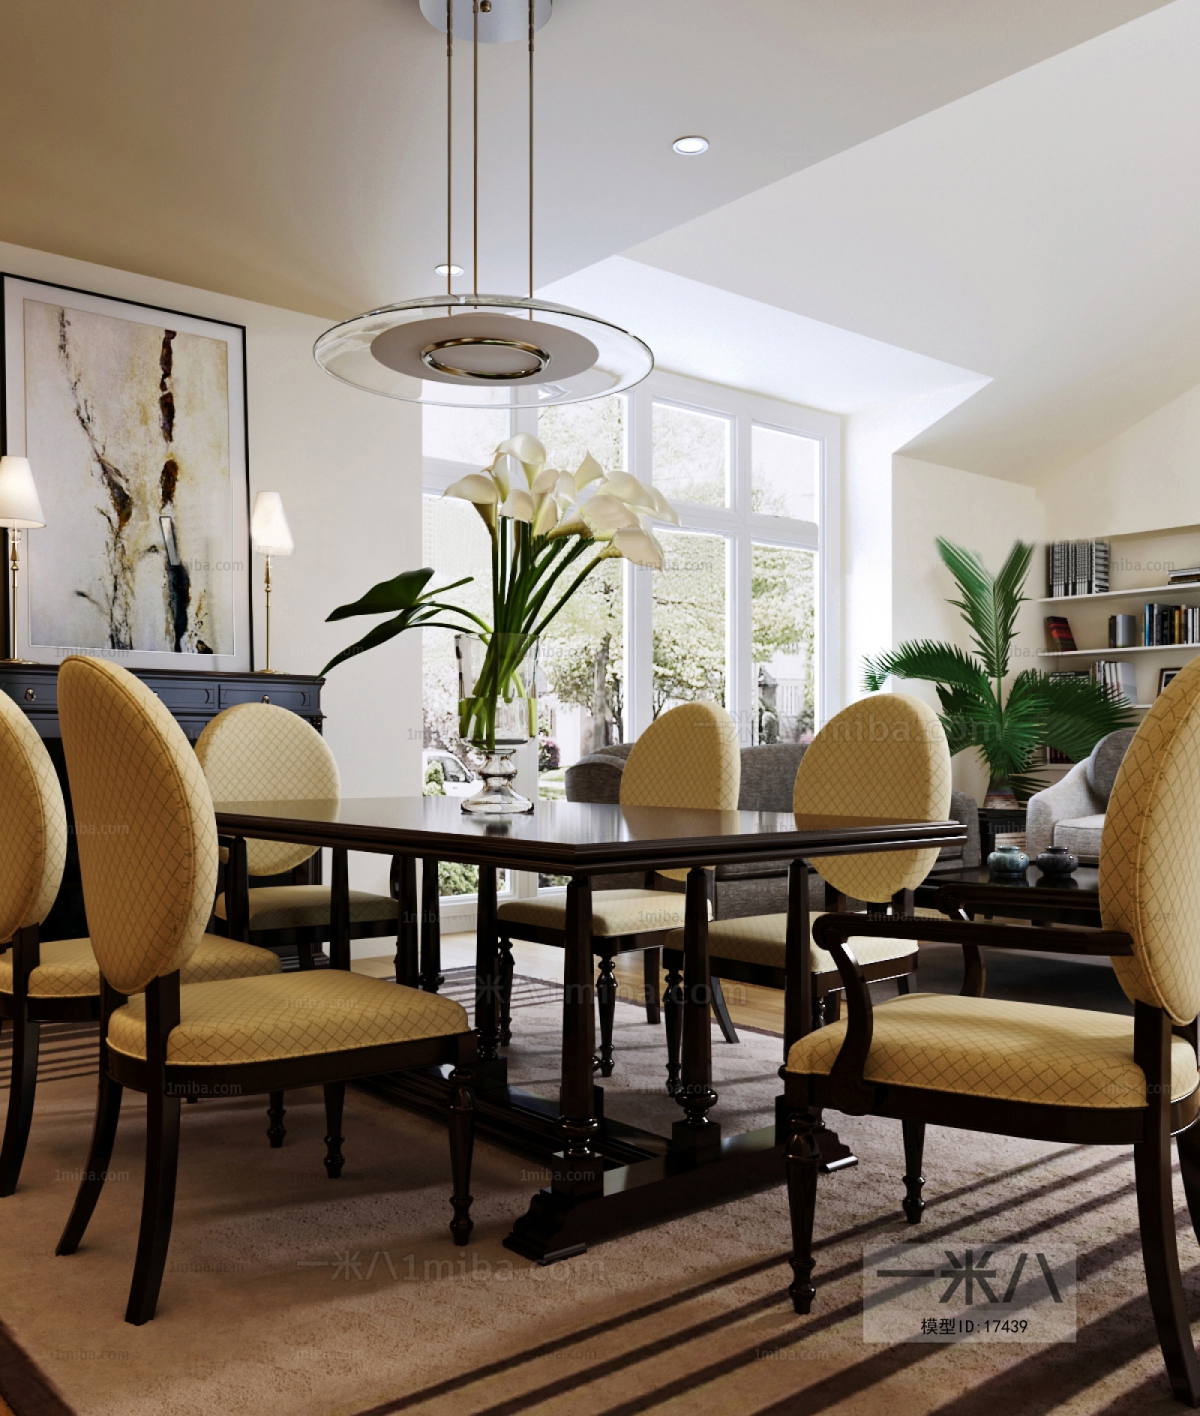 American Style Simple European Style Dining Table And Chairs